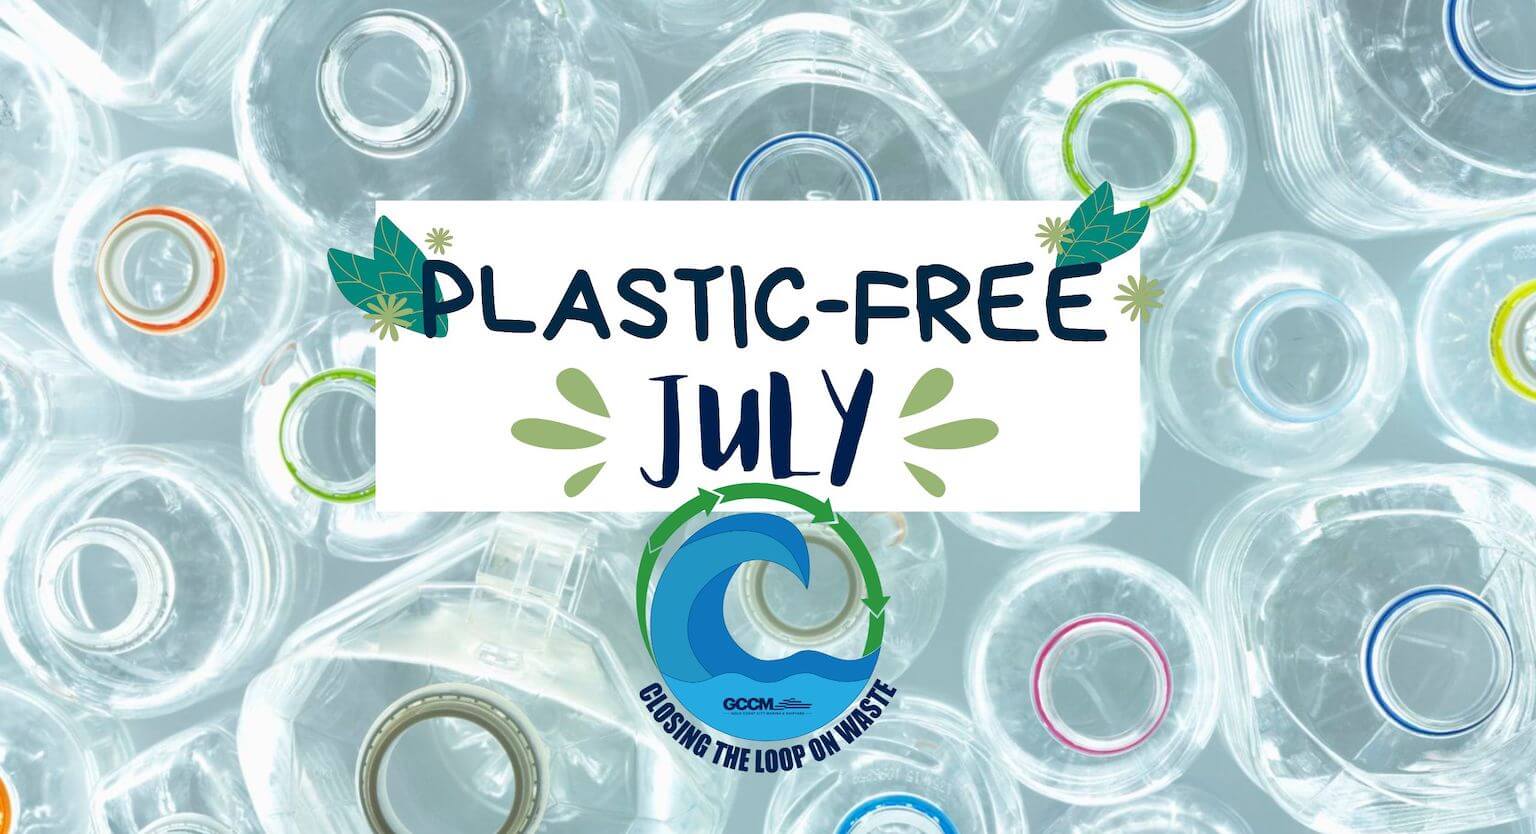 Free Up Plastic for #PlasticFreeJuly